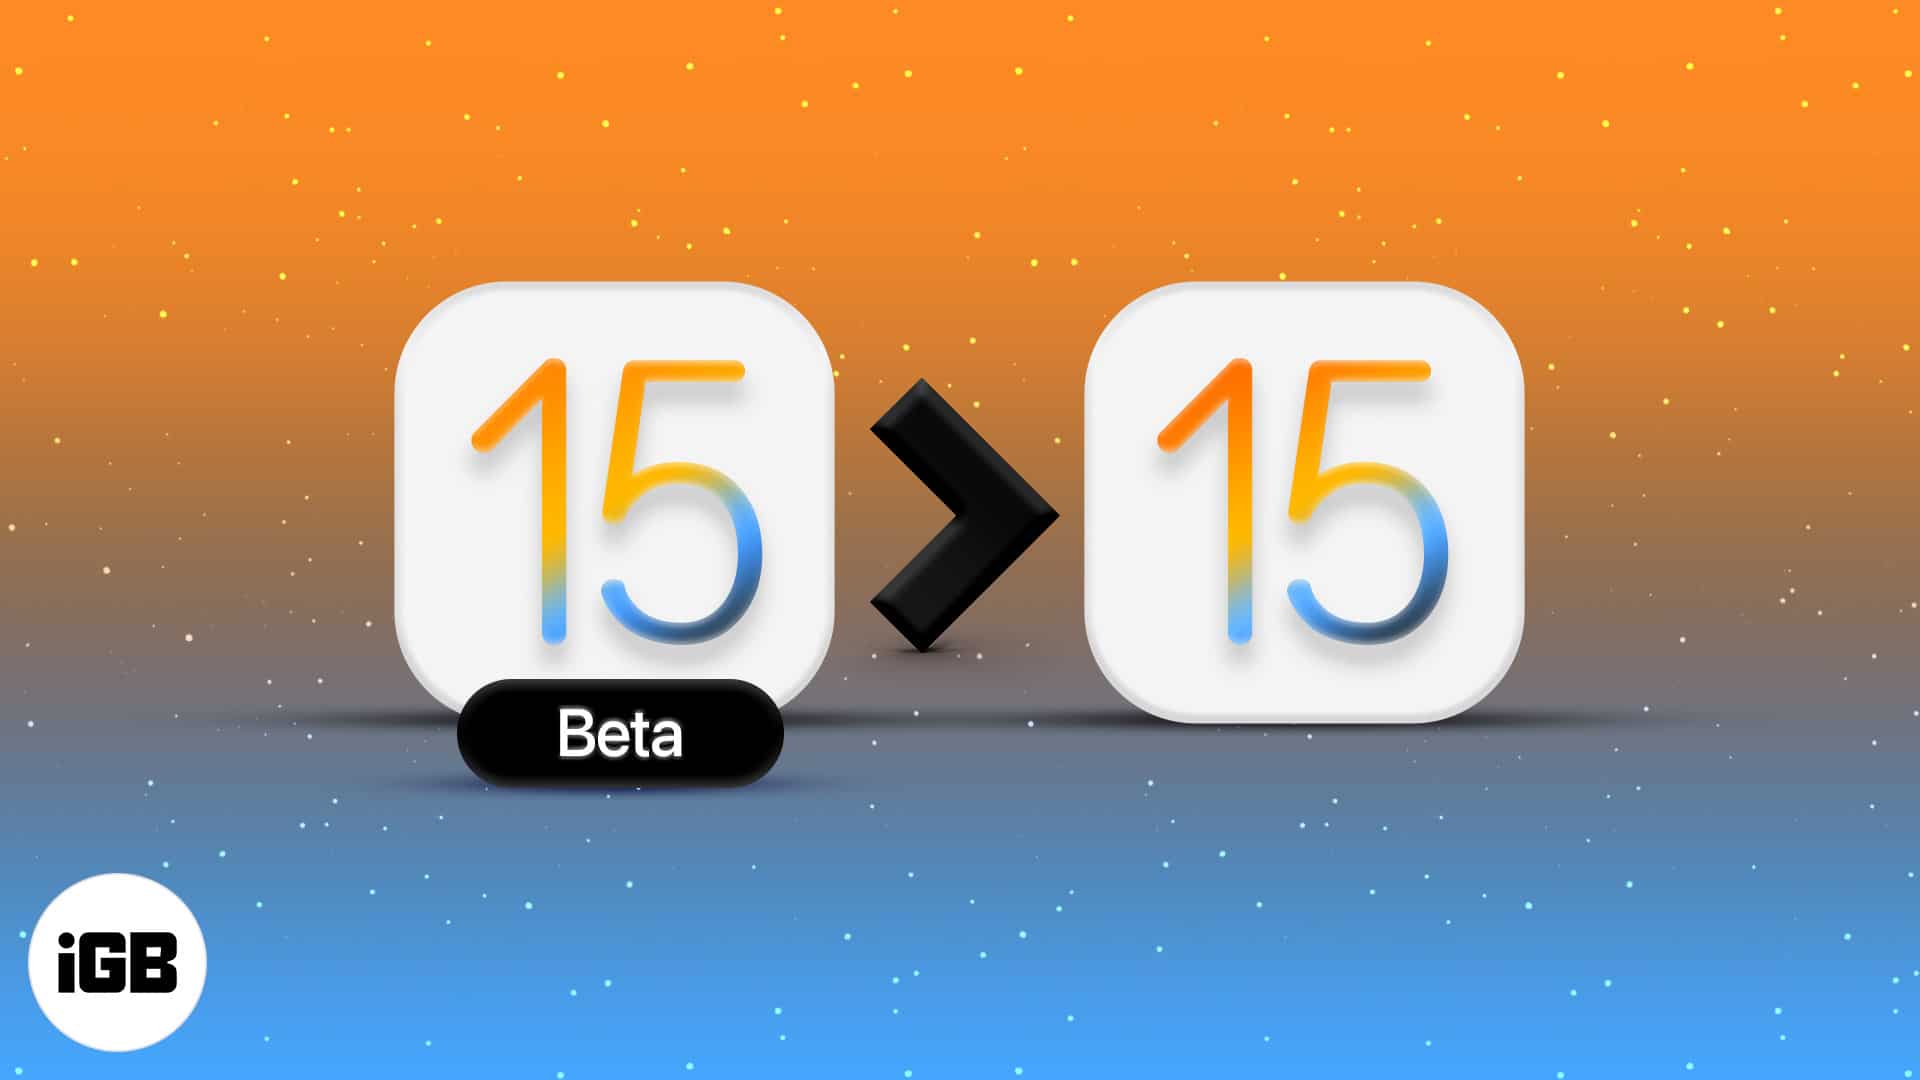 How to remove iOS 15 beta and install the official version